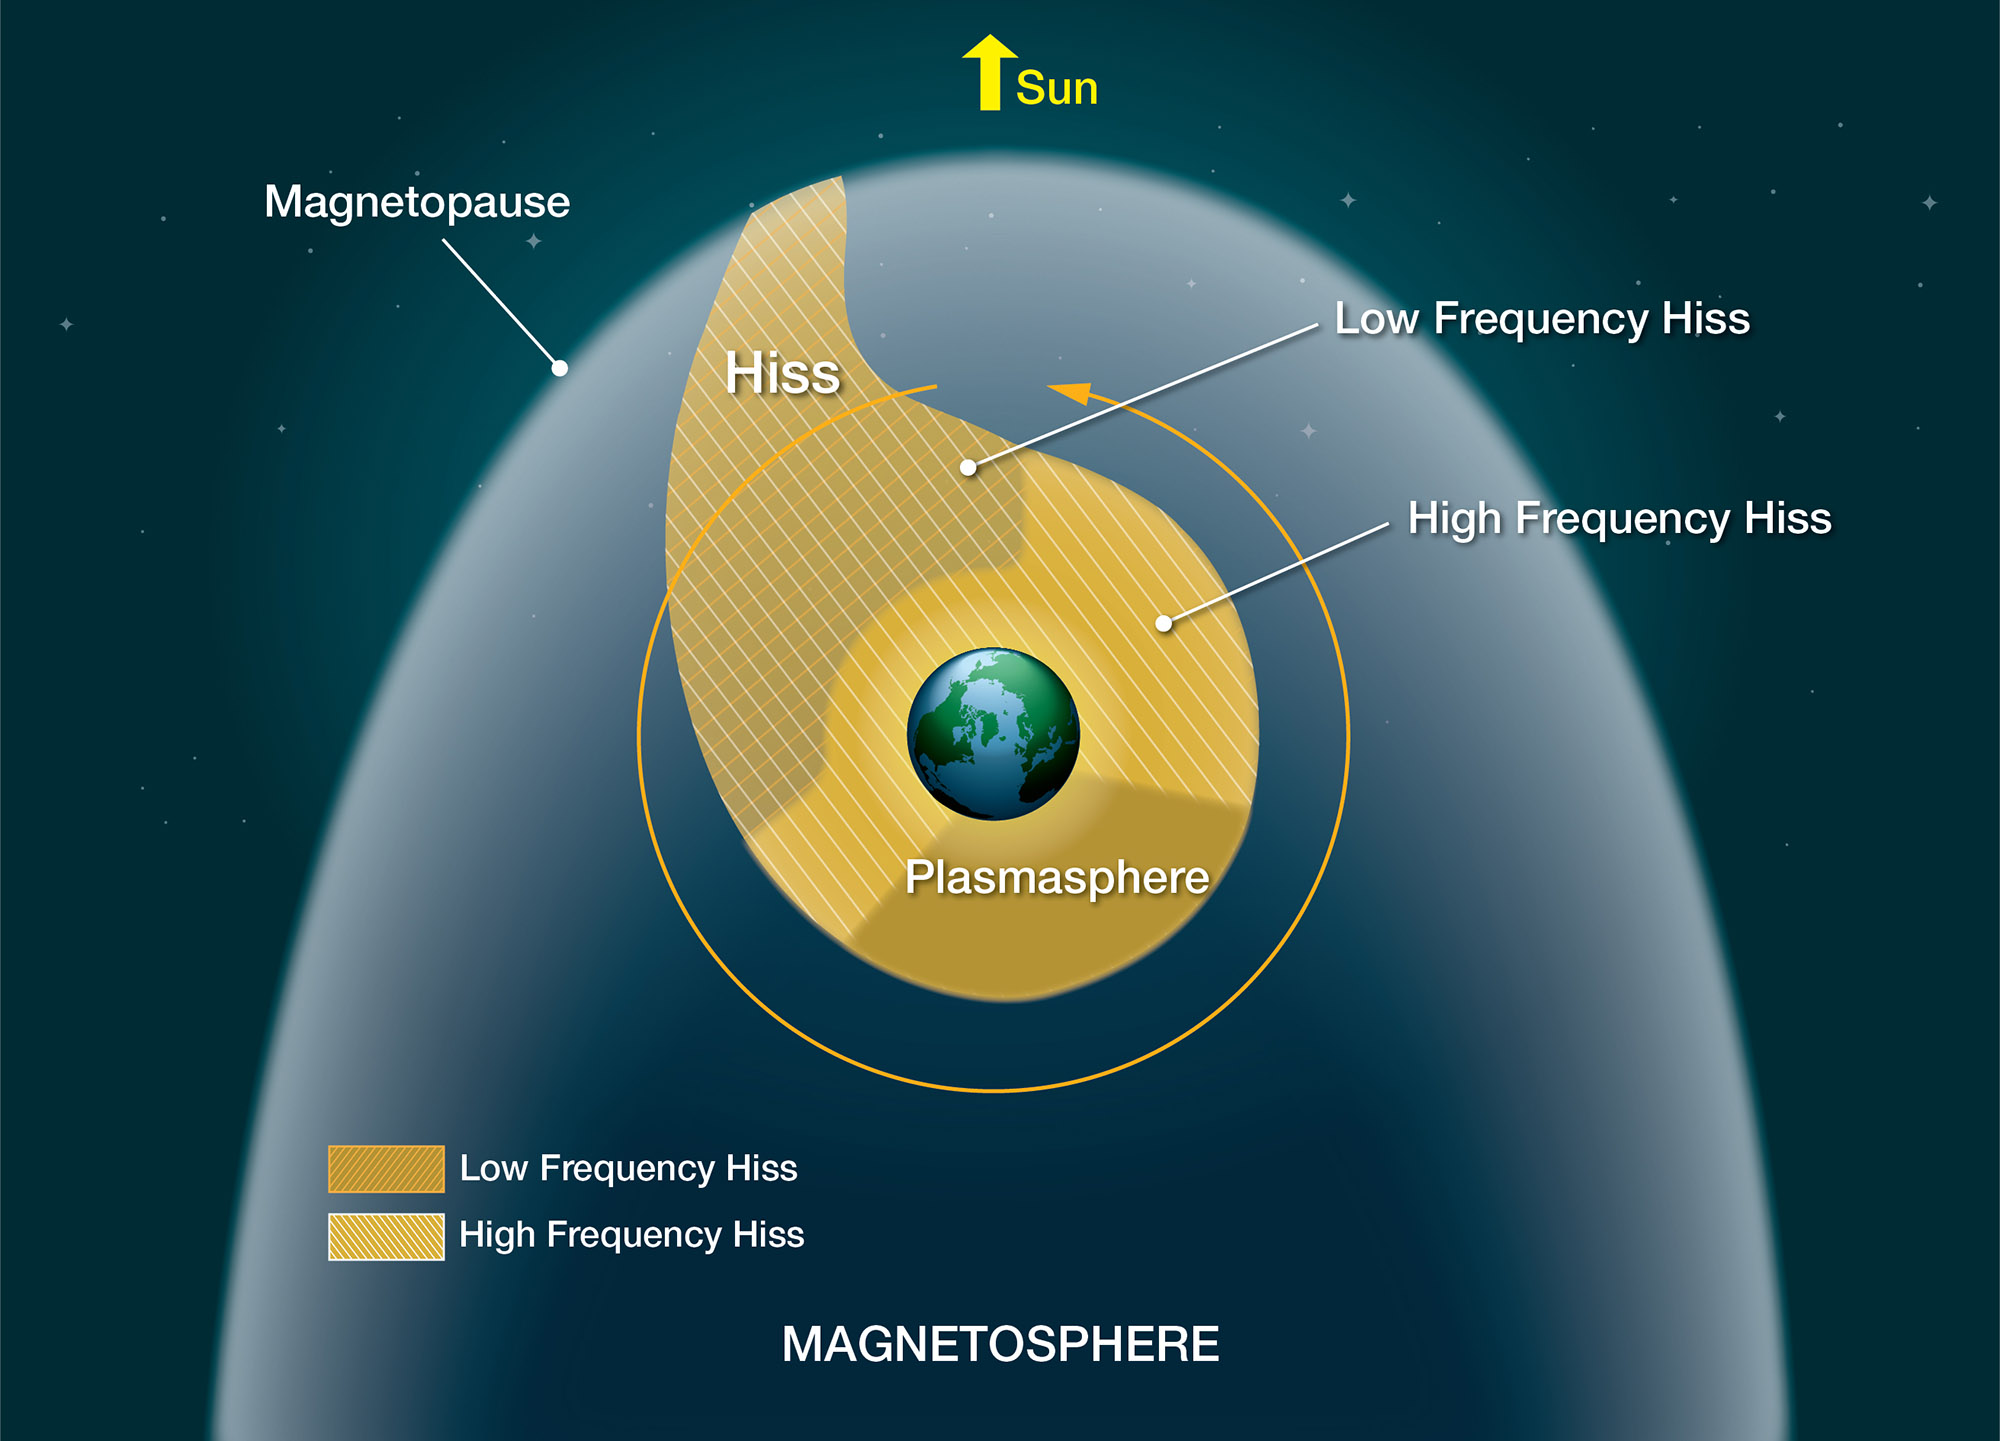 illustration showing low- and high-frequency hiss regions in near-Earth space